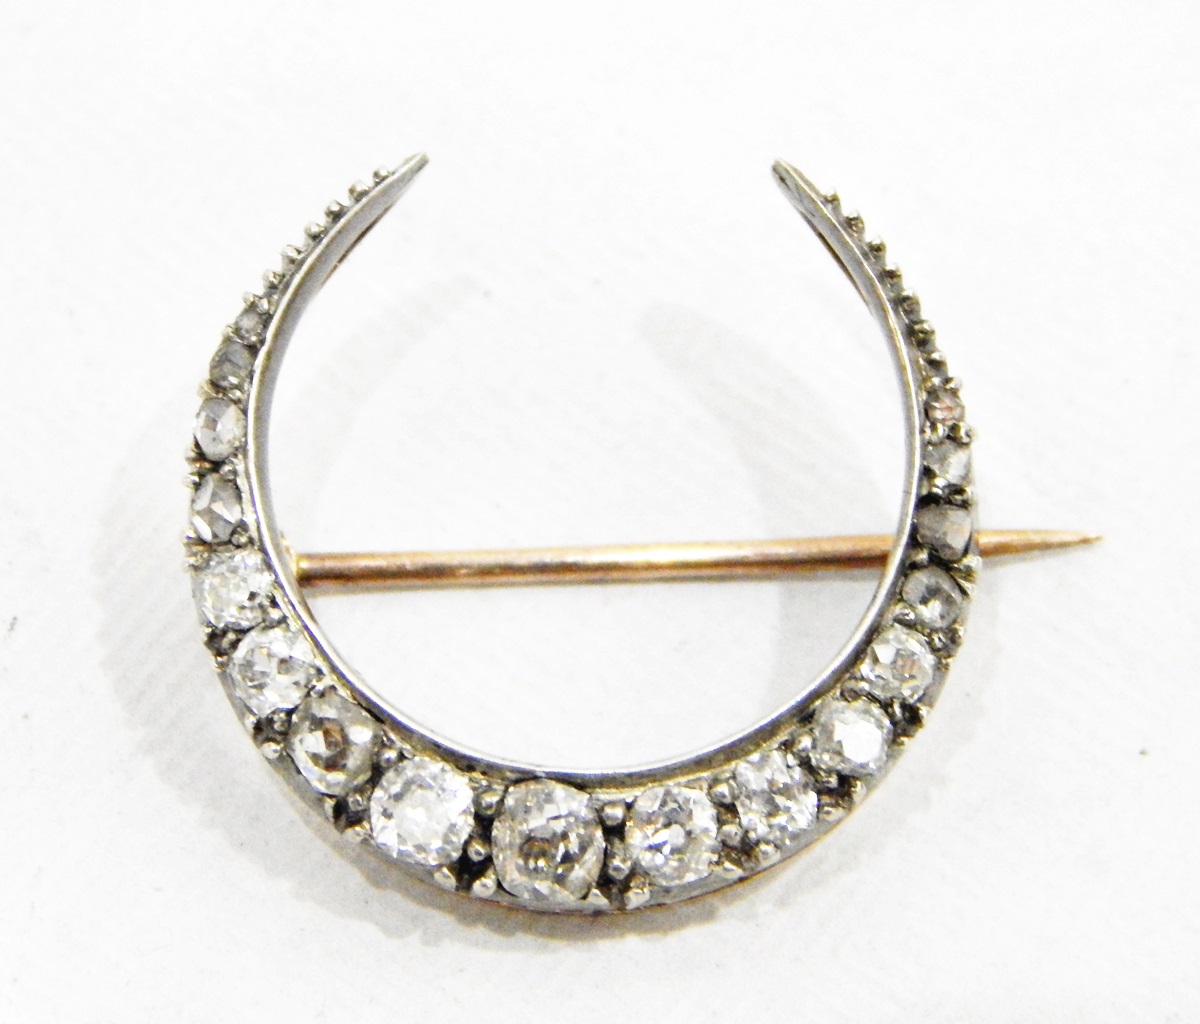 Diamond crescent brooch in white and yellow gold-coloured metal setting,